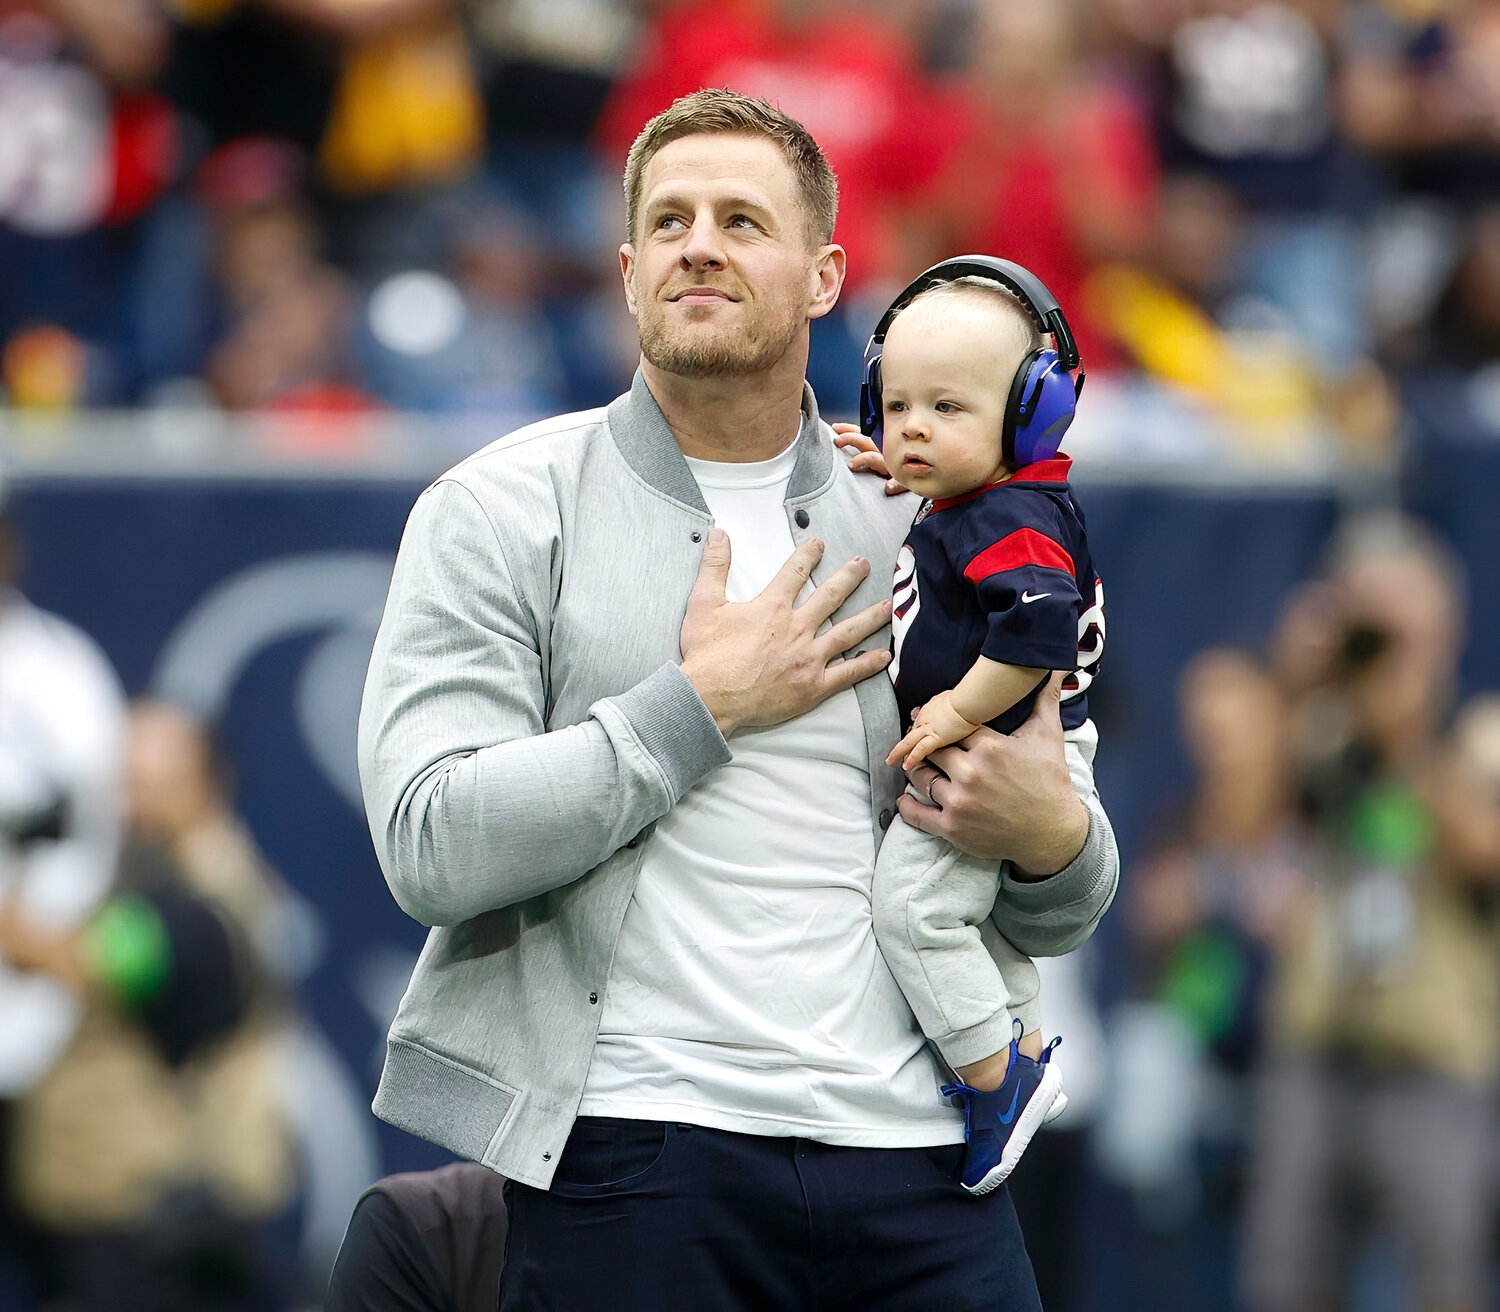 Former Houston Texans player JJ Watt greets the crowd before the start of an NFL game between the Texans and the Steelers on October 1, 2023 in Houston. Watt was induced into the Texans’ Ring of Honor at halftime.